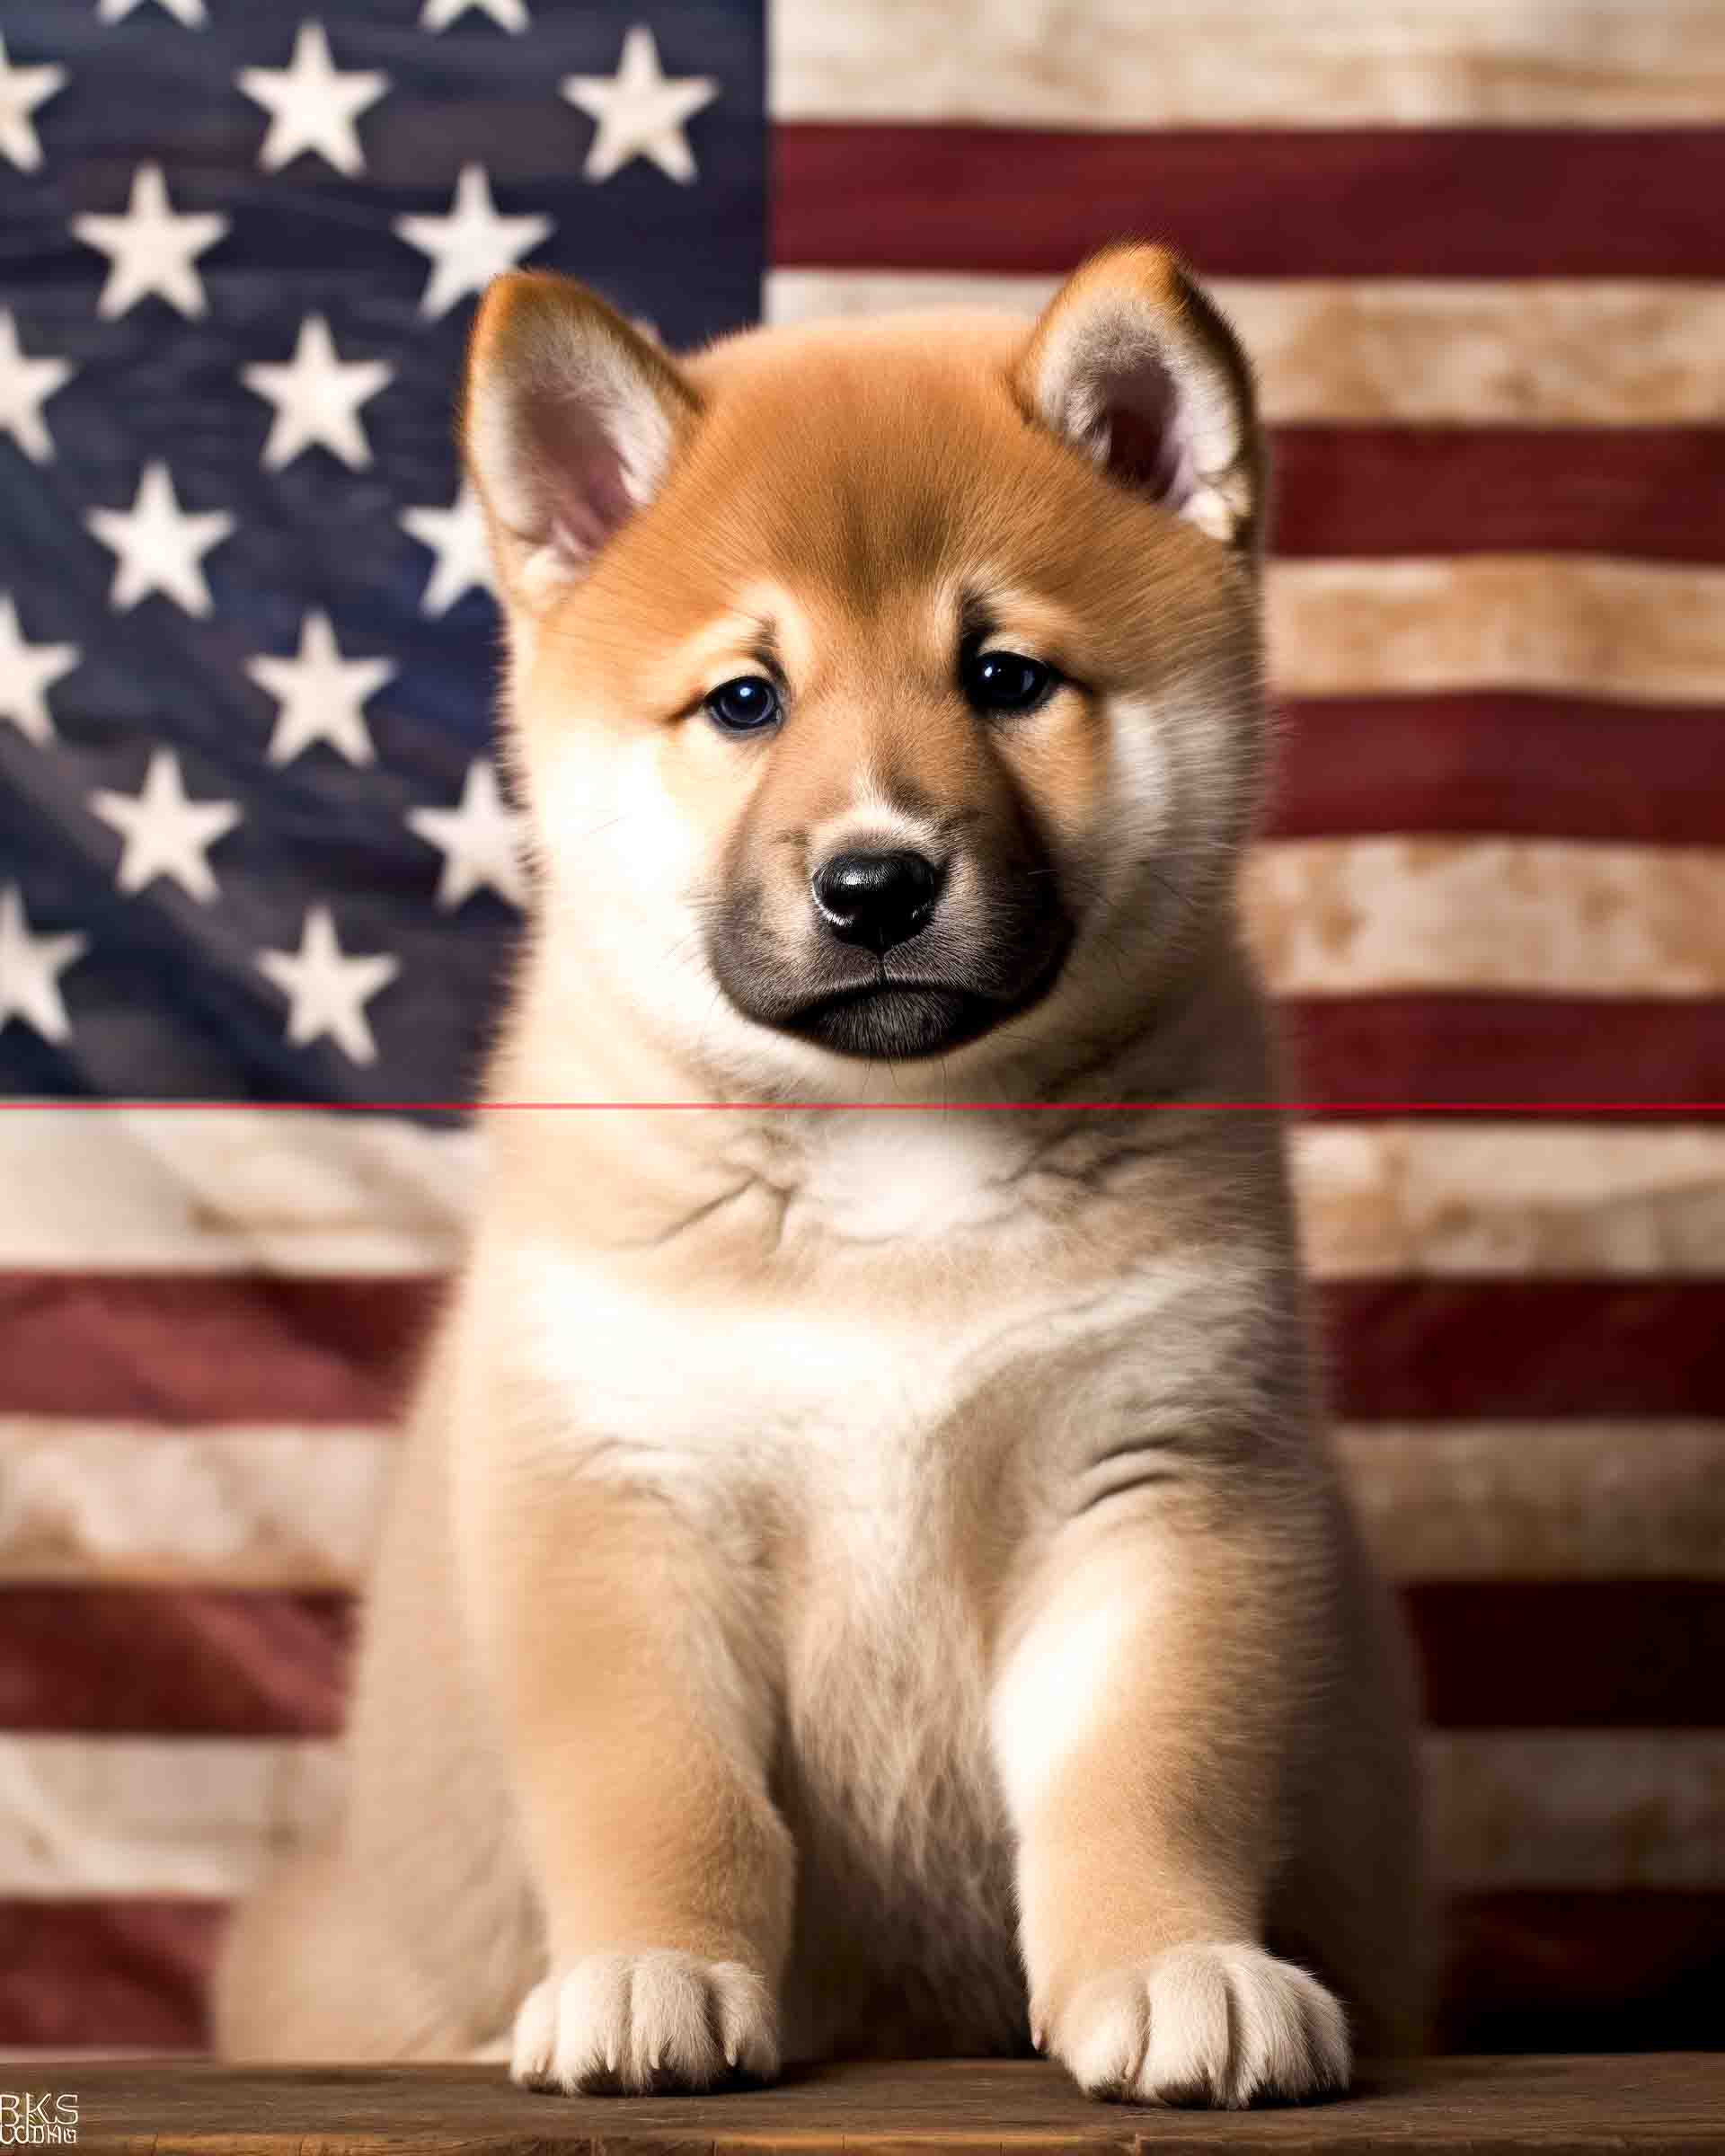 A shiba inu puppy sits in front of an american flag, looking directly at the viewer. The puppy has a thick dense fluffy reddish-brown and white coat, perky ears, and a soft, alert expression. The background features a vintage American flag.